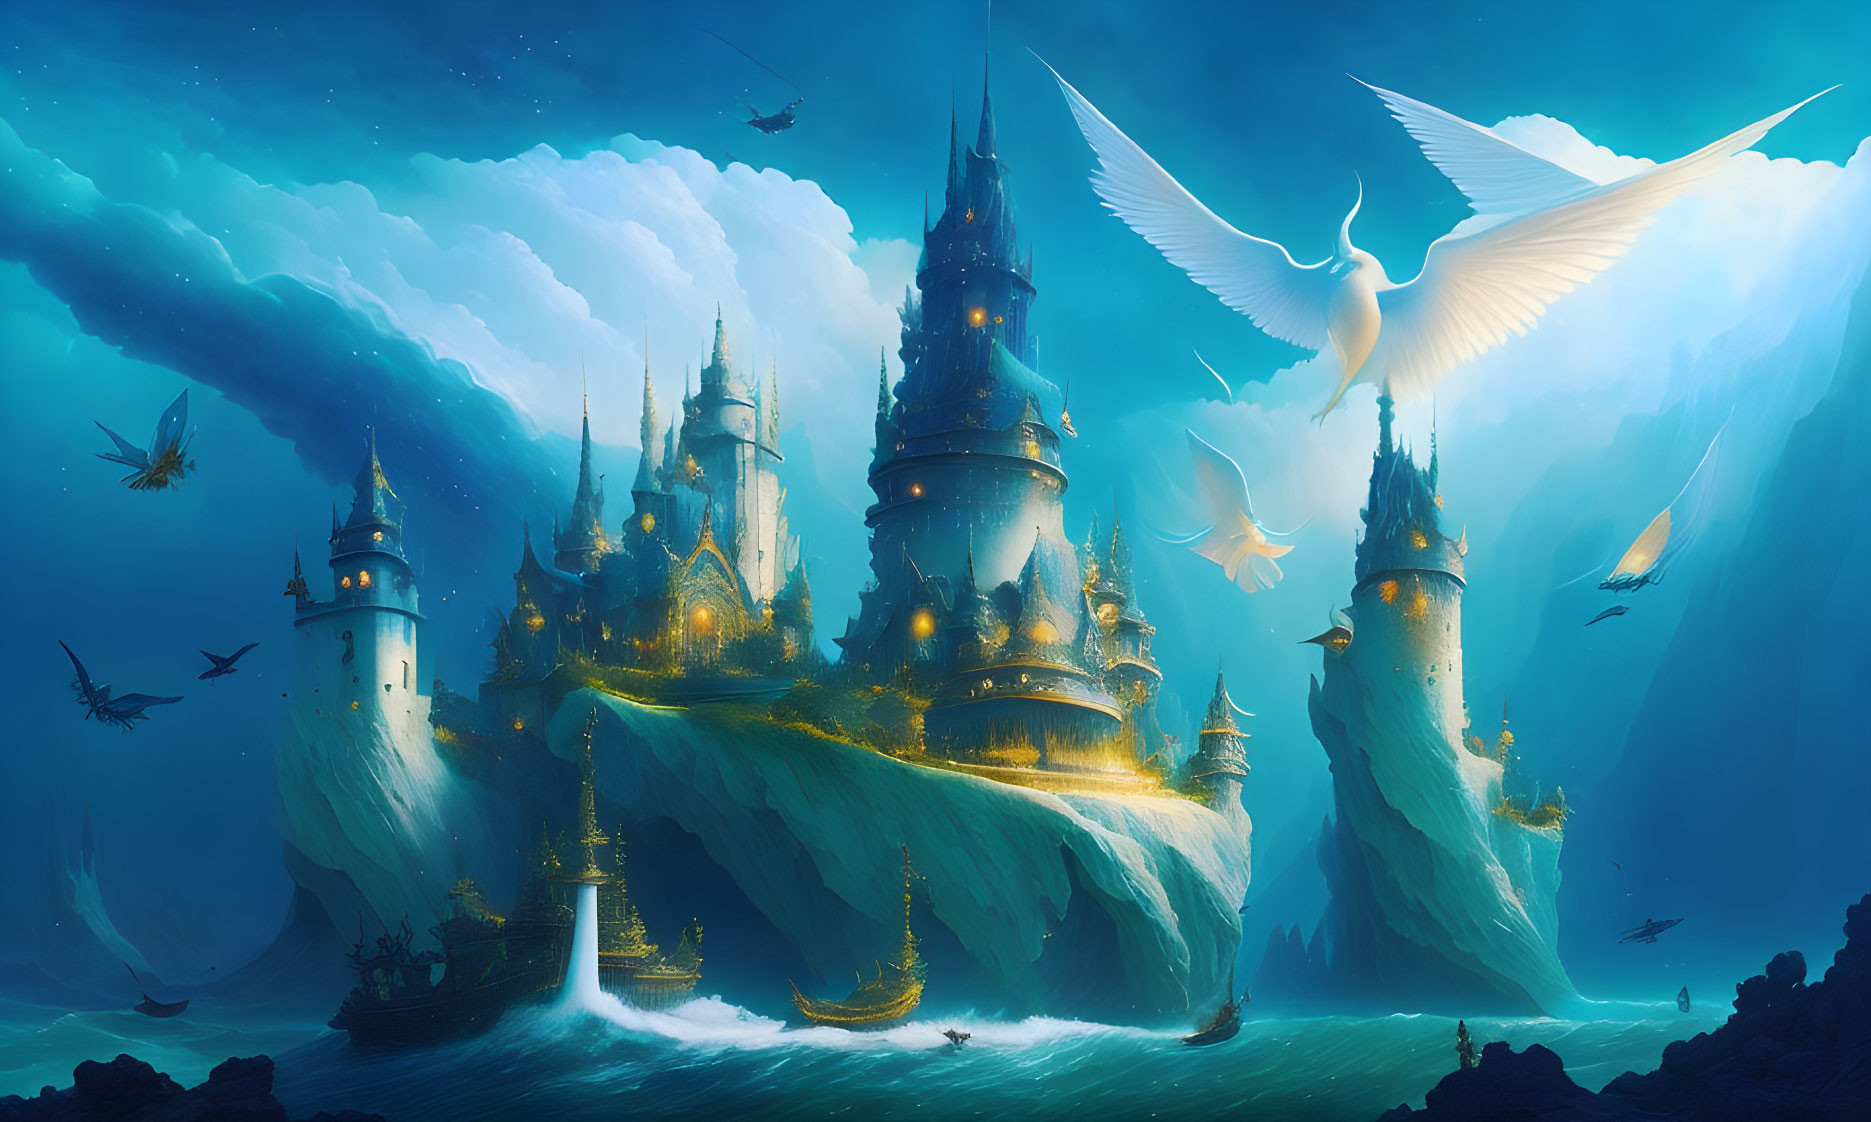 Fantastical castle on floating islands with waterfalls and flying ships